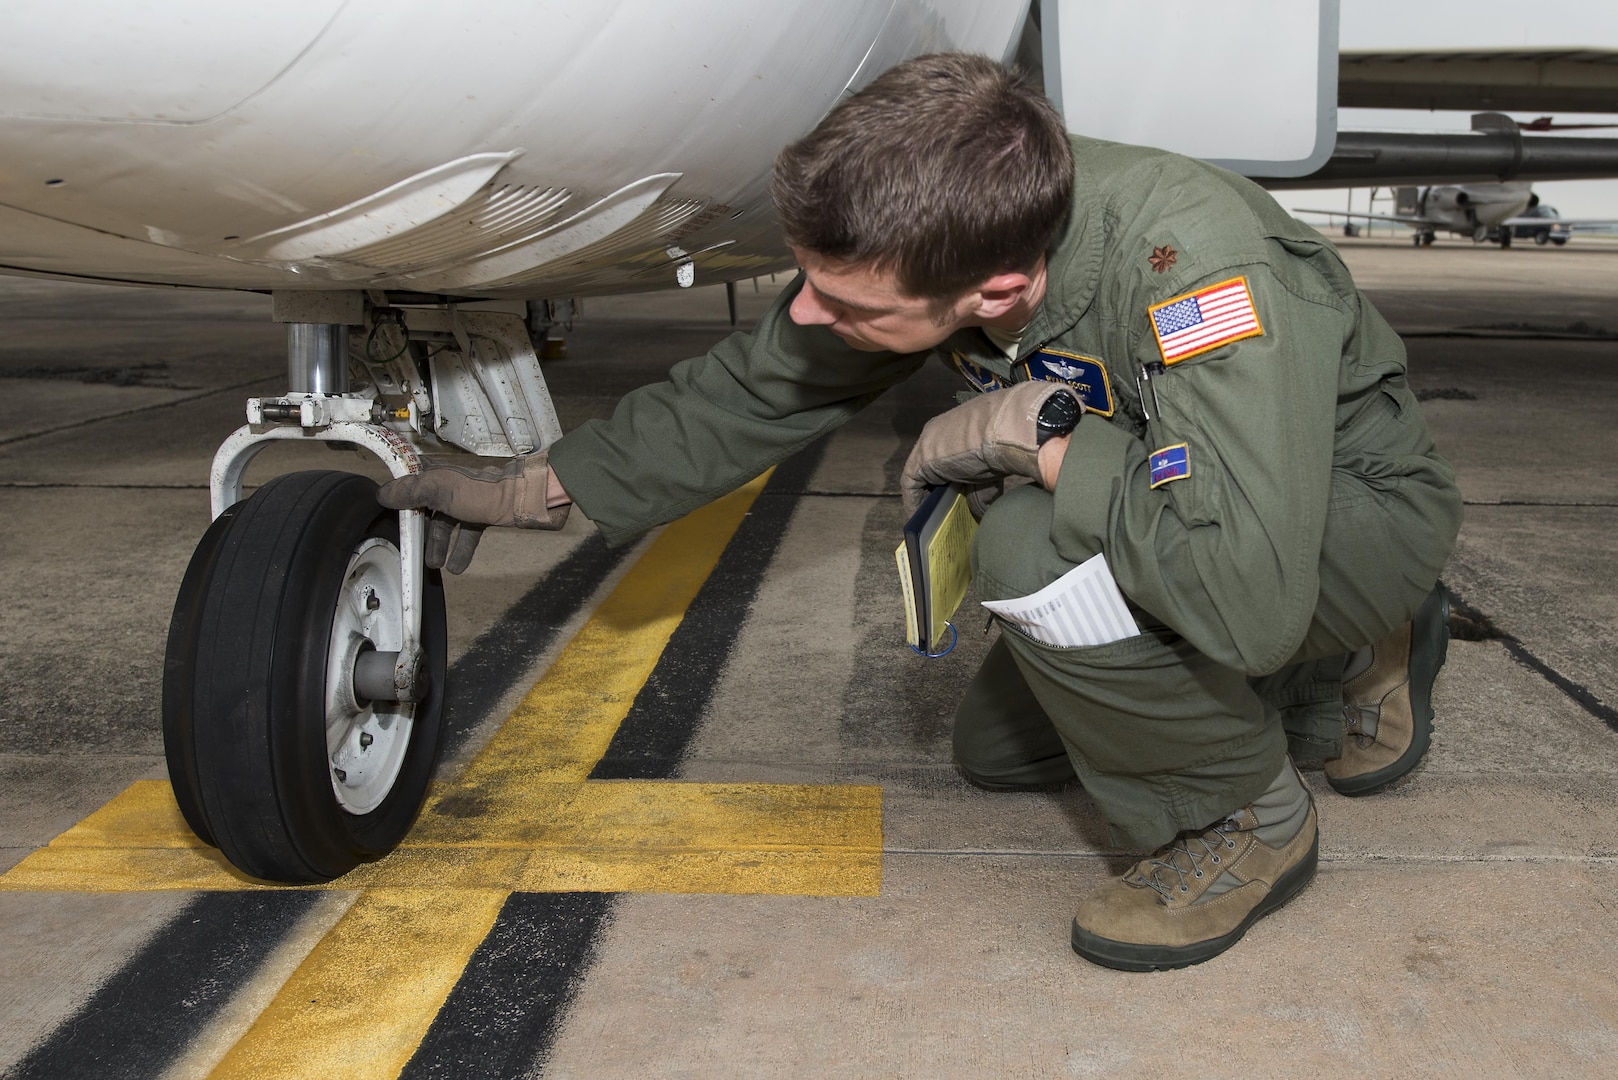 Maj. Ryan Scott, 99th Flying Training Squadron “A” flight commander and T-1A Jayhawk instructor pilot, performs pre-flight checks on a T-1A before a training mission at Joint Base San Antonio-Randolph May 16, 2016. Instructor pilot trainees who attend pilot instructor training at JBSA-Randolph combine to fly 8,500 hours a year and 80 sorties per week.